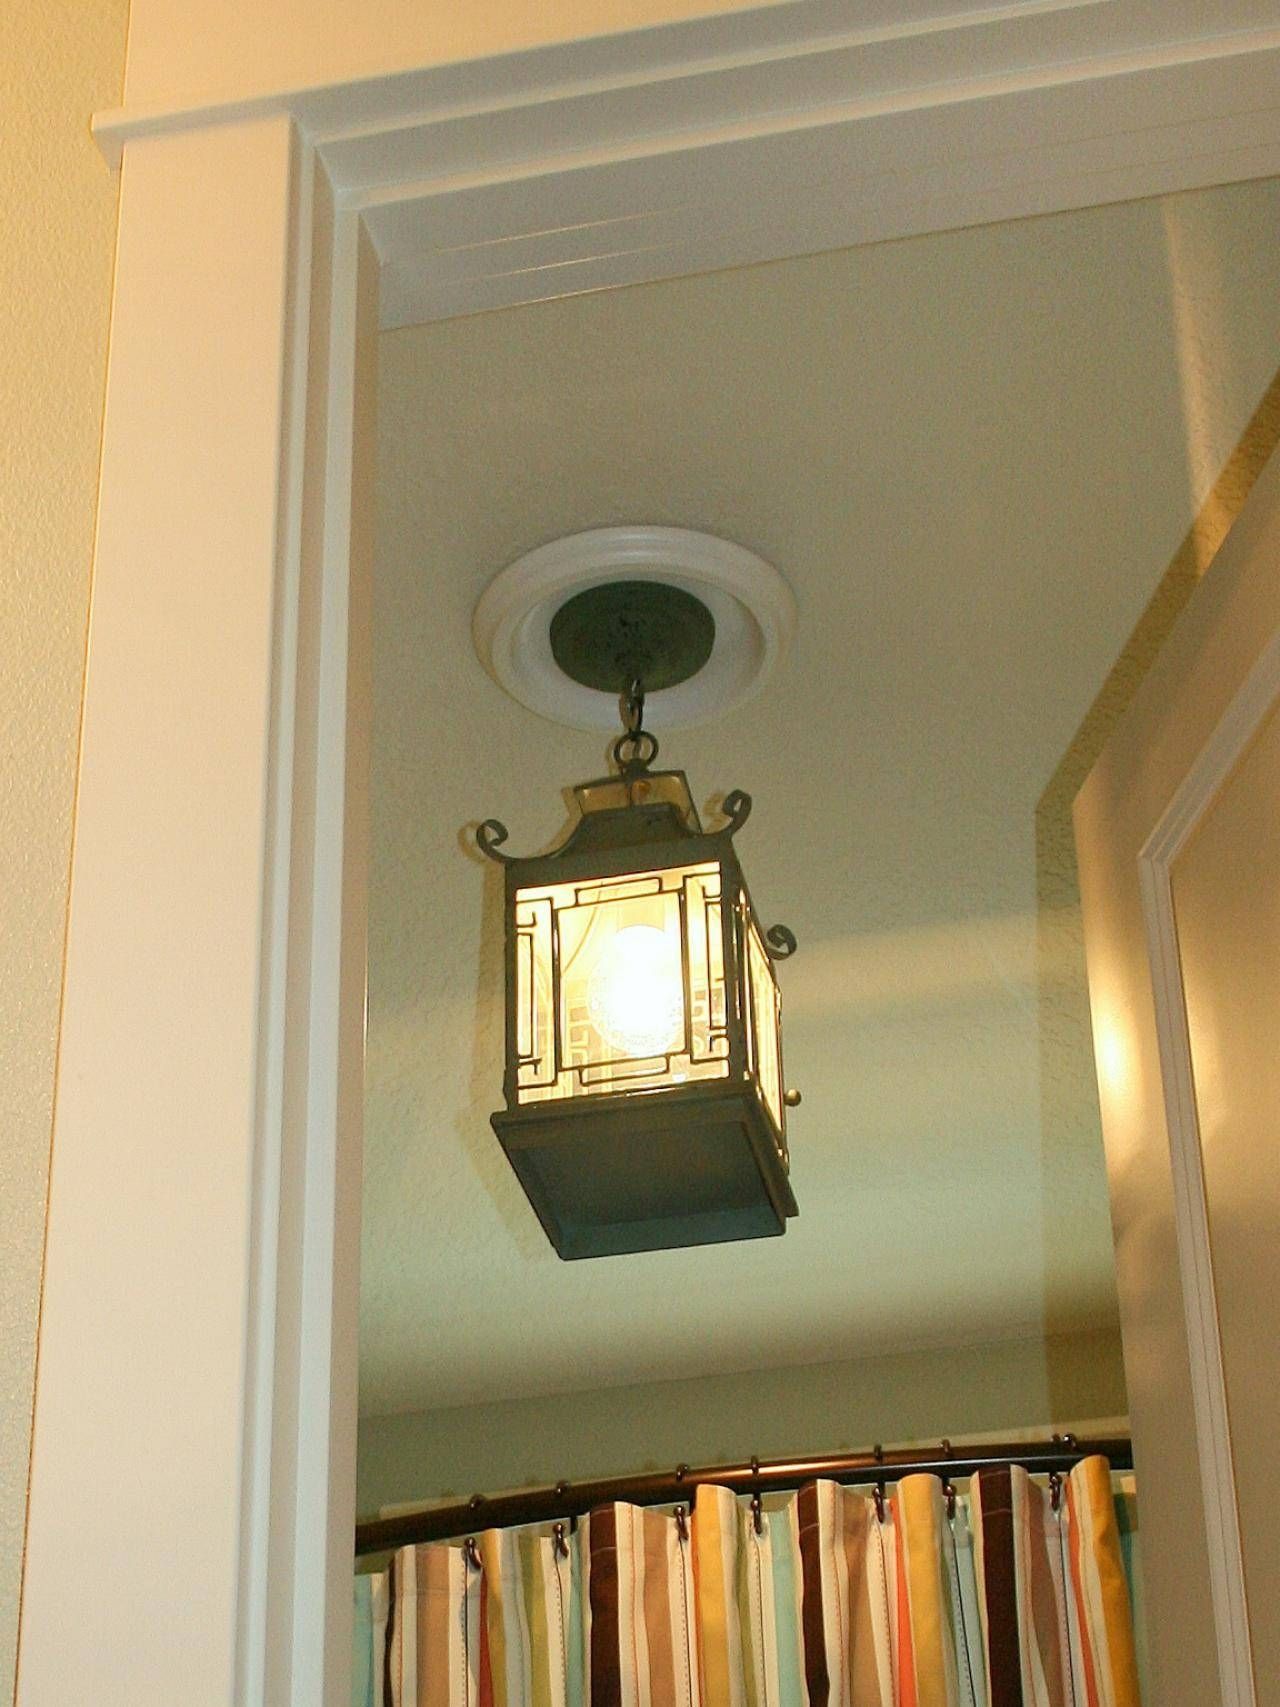 Replace Recessed Light With A Pendant Fixture | Hgtv Throughout Recessed Light To Pendant Lights (View 6 of 15)